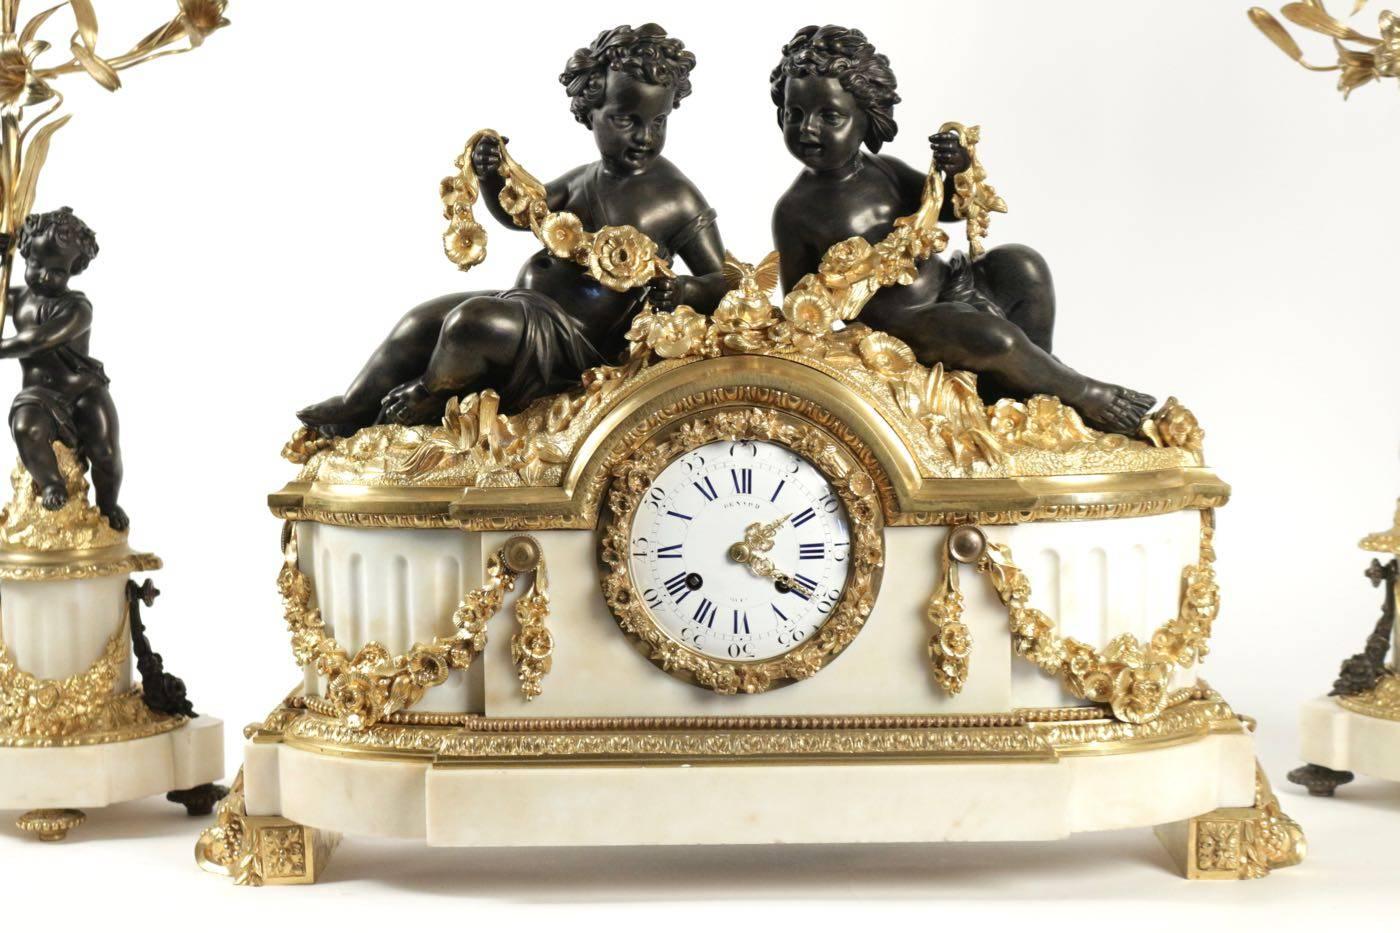 Important mantle clock with matching candelabras, period Napoleon III, with lovers in bronze, white marble, gold gilt bronze and patinated, 19th century.
Measure: Mantel clock: H 49cm, L 60cm, P 18cm
Candelabras: H 66cm, L 20cm, P 20cm.